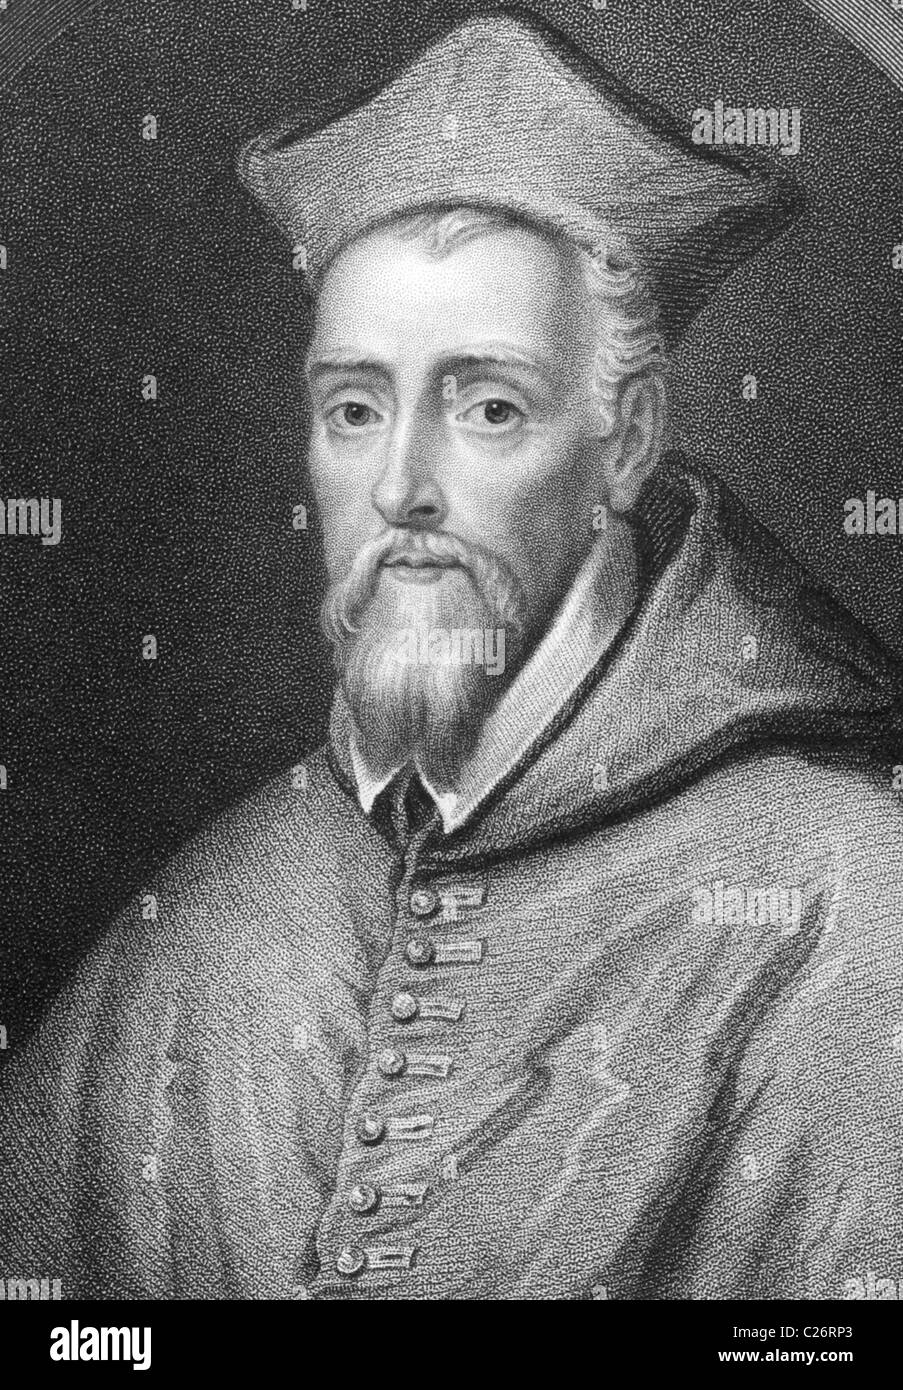 William Allen (1532-1594) on engraving from the 1800s. English Roman Catholic priest and cardinal. Stock Photo